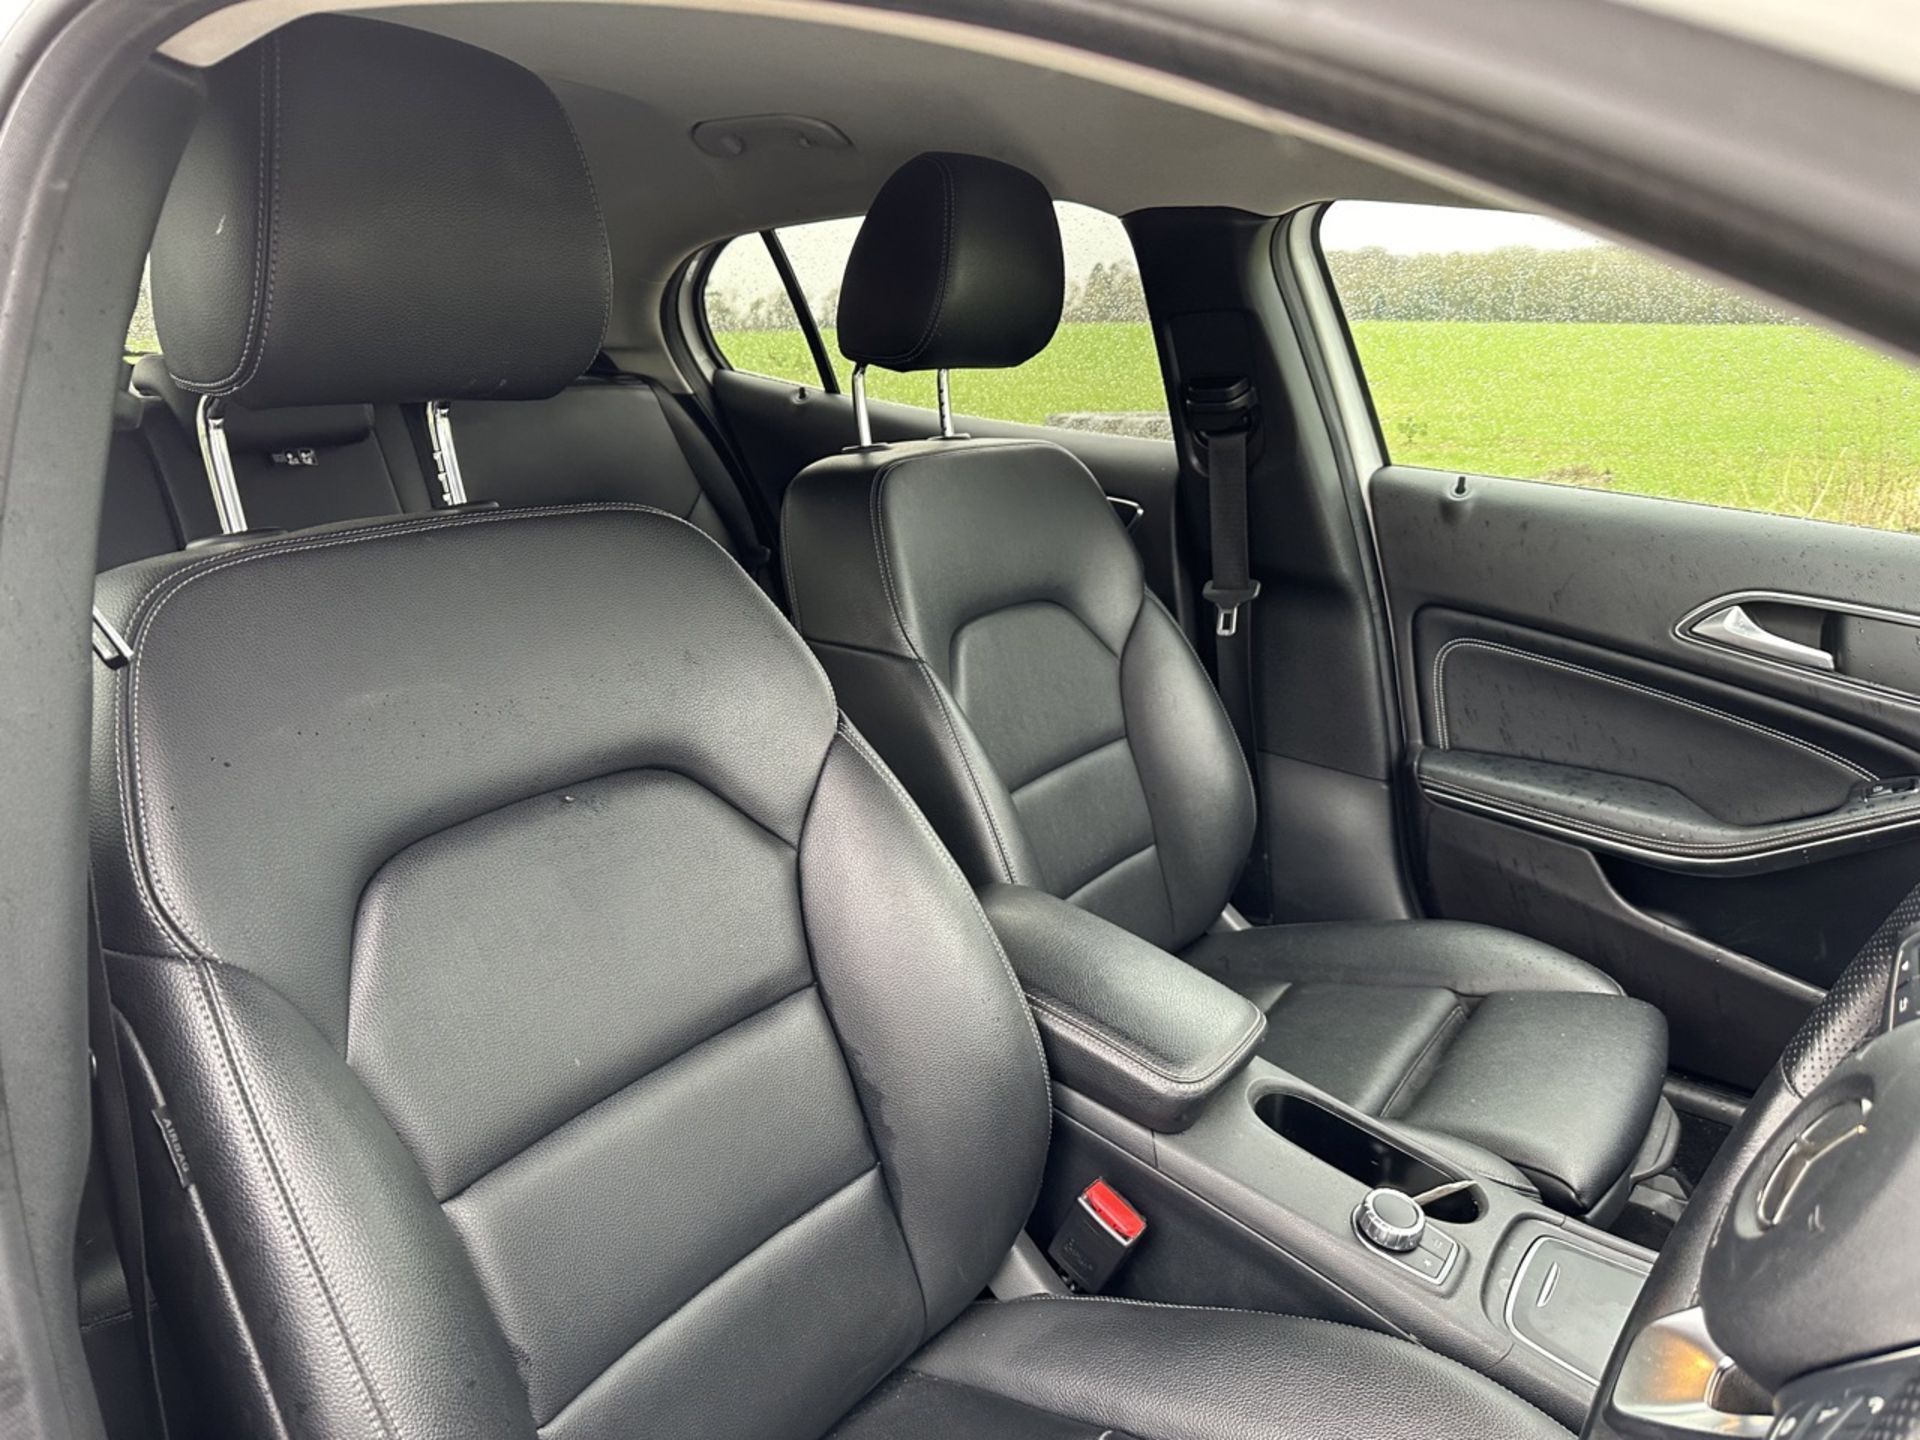 MERCEDES GLA 200d AUTO "SPORT EXECUTIVE" 2019 MODEL - LEATHER - LOW MILES - AIR CON - Image 12 of 17